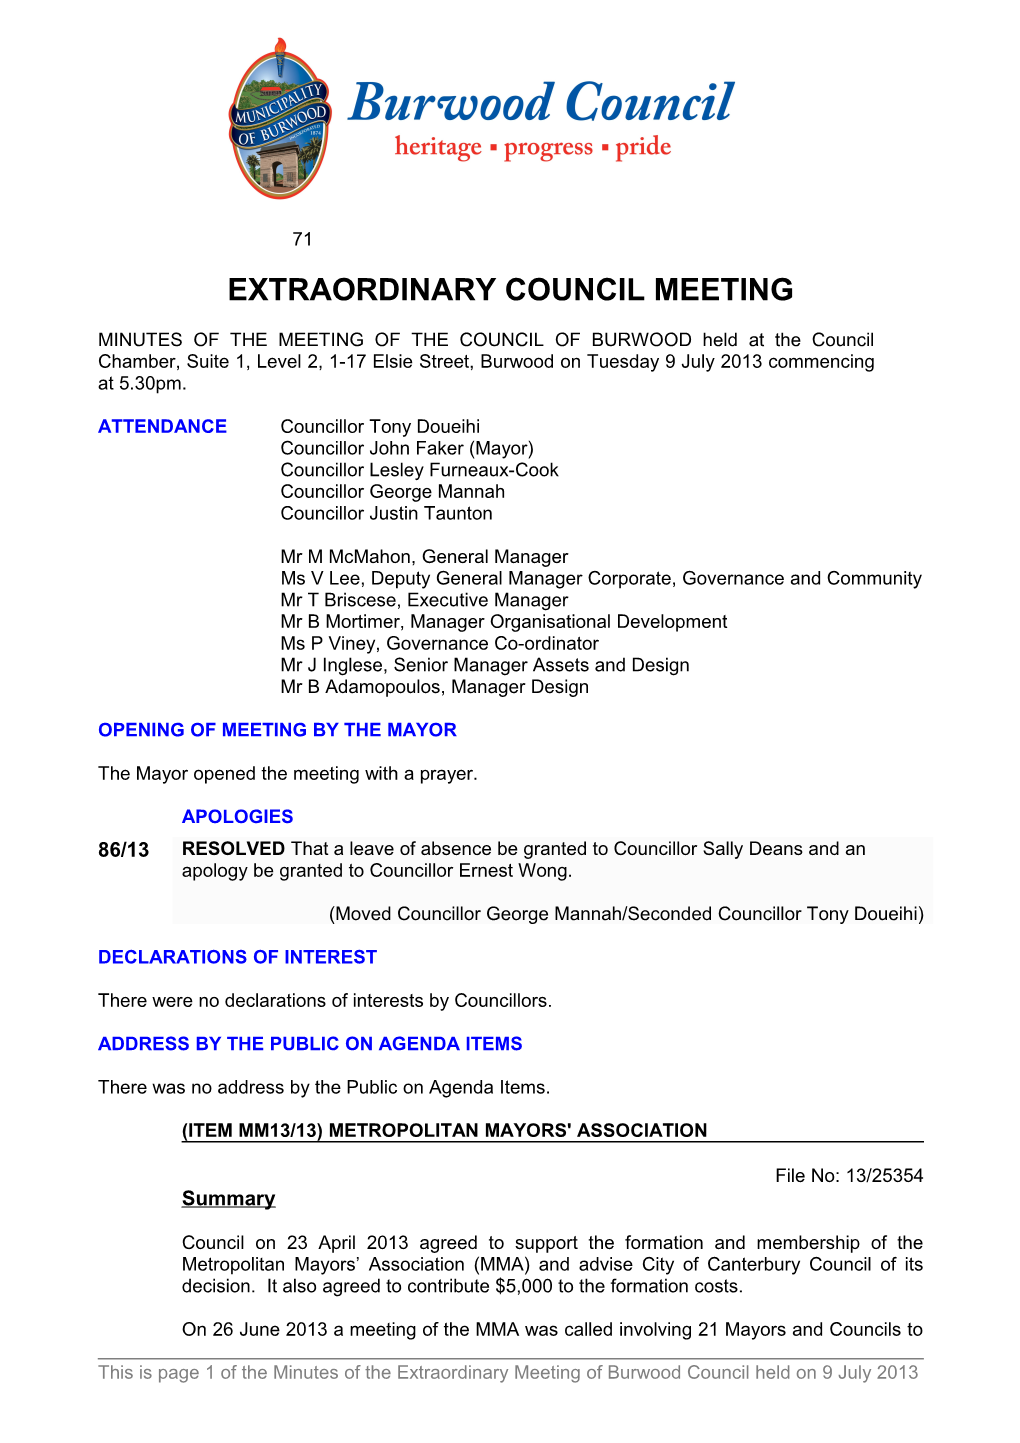 Minutes of Extraordinary Council Meeting - 9 July 2013